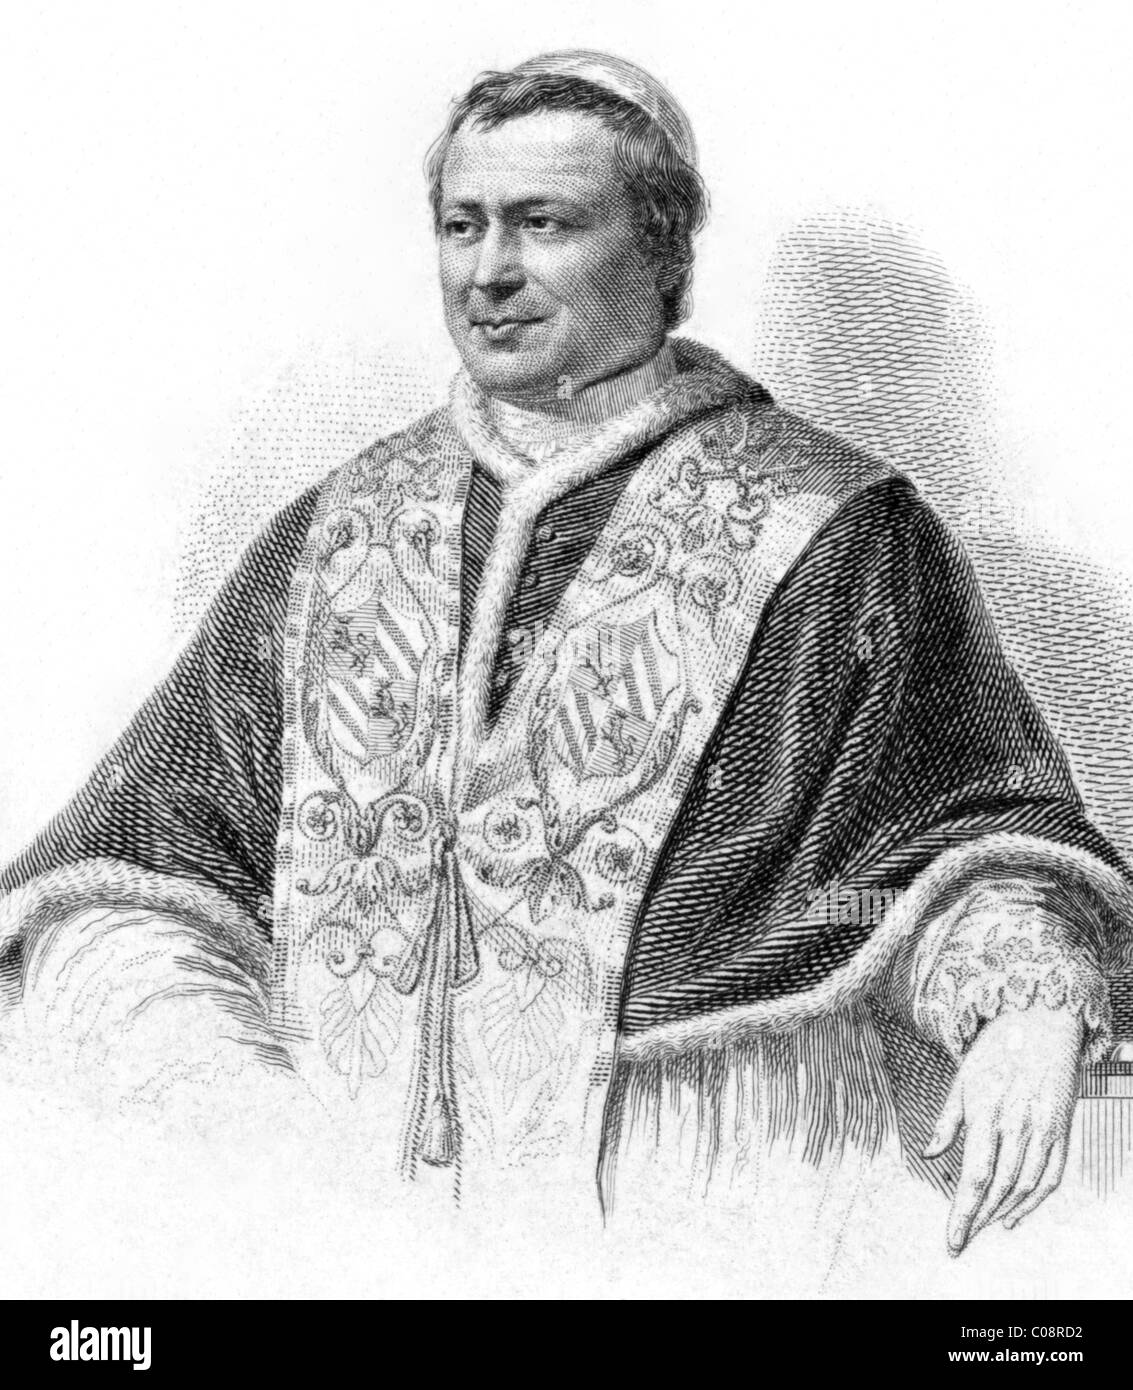 Pope Pius IX (1792-1878) on engraving from the 1800s Stock Photo - Alamy